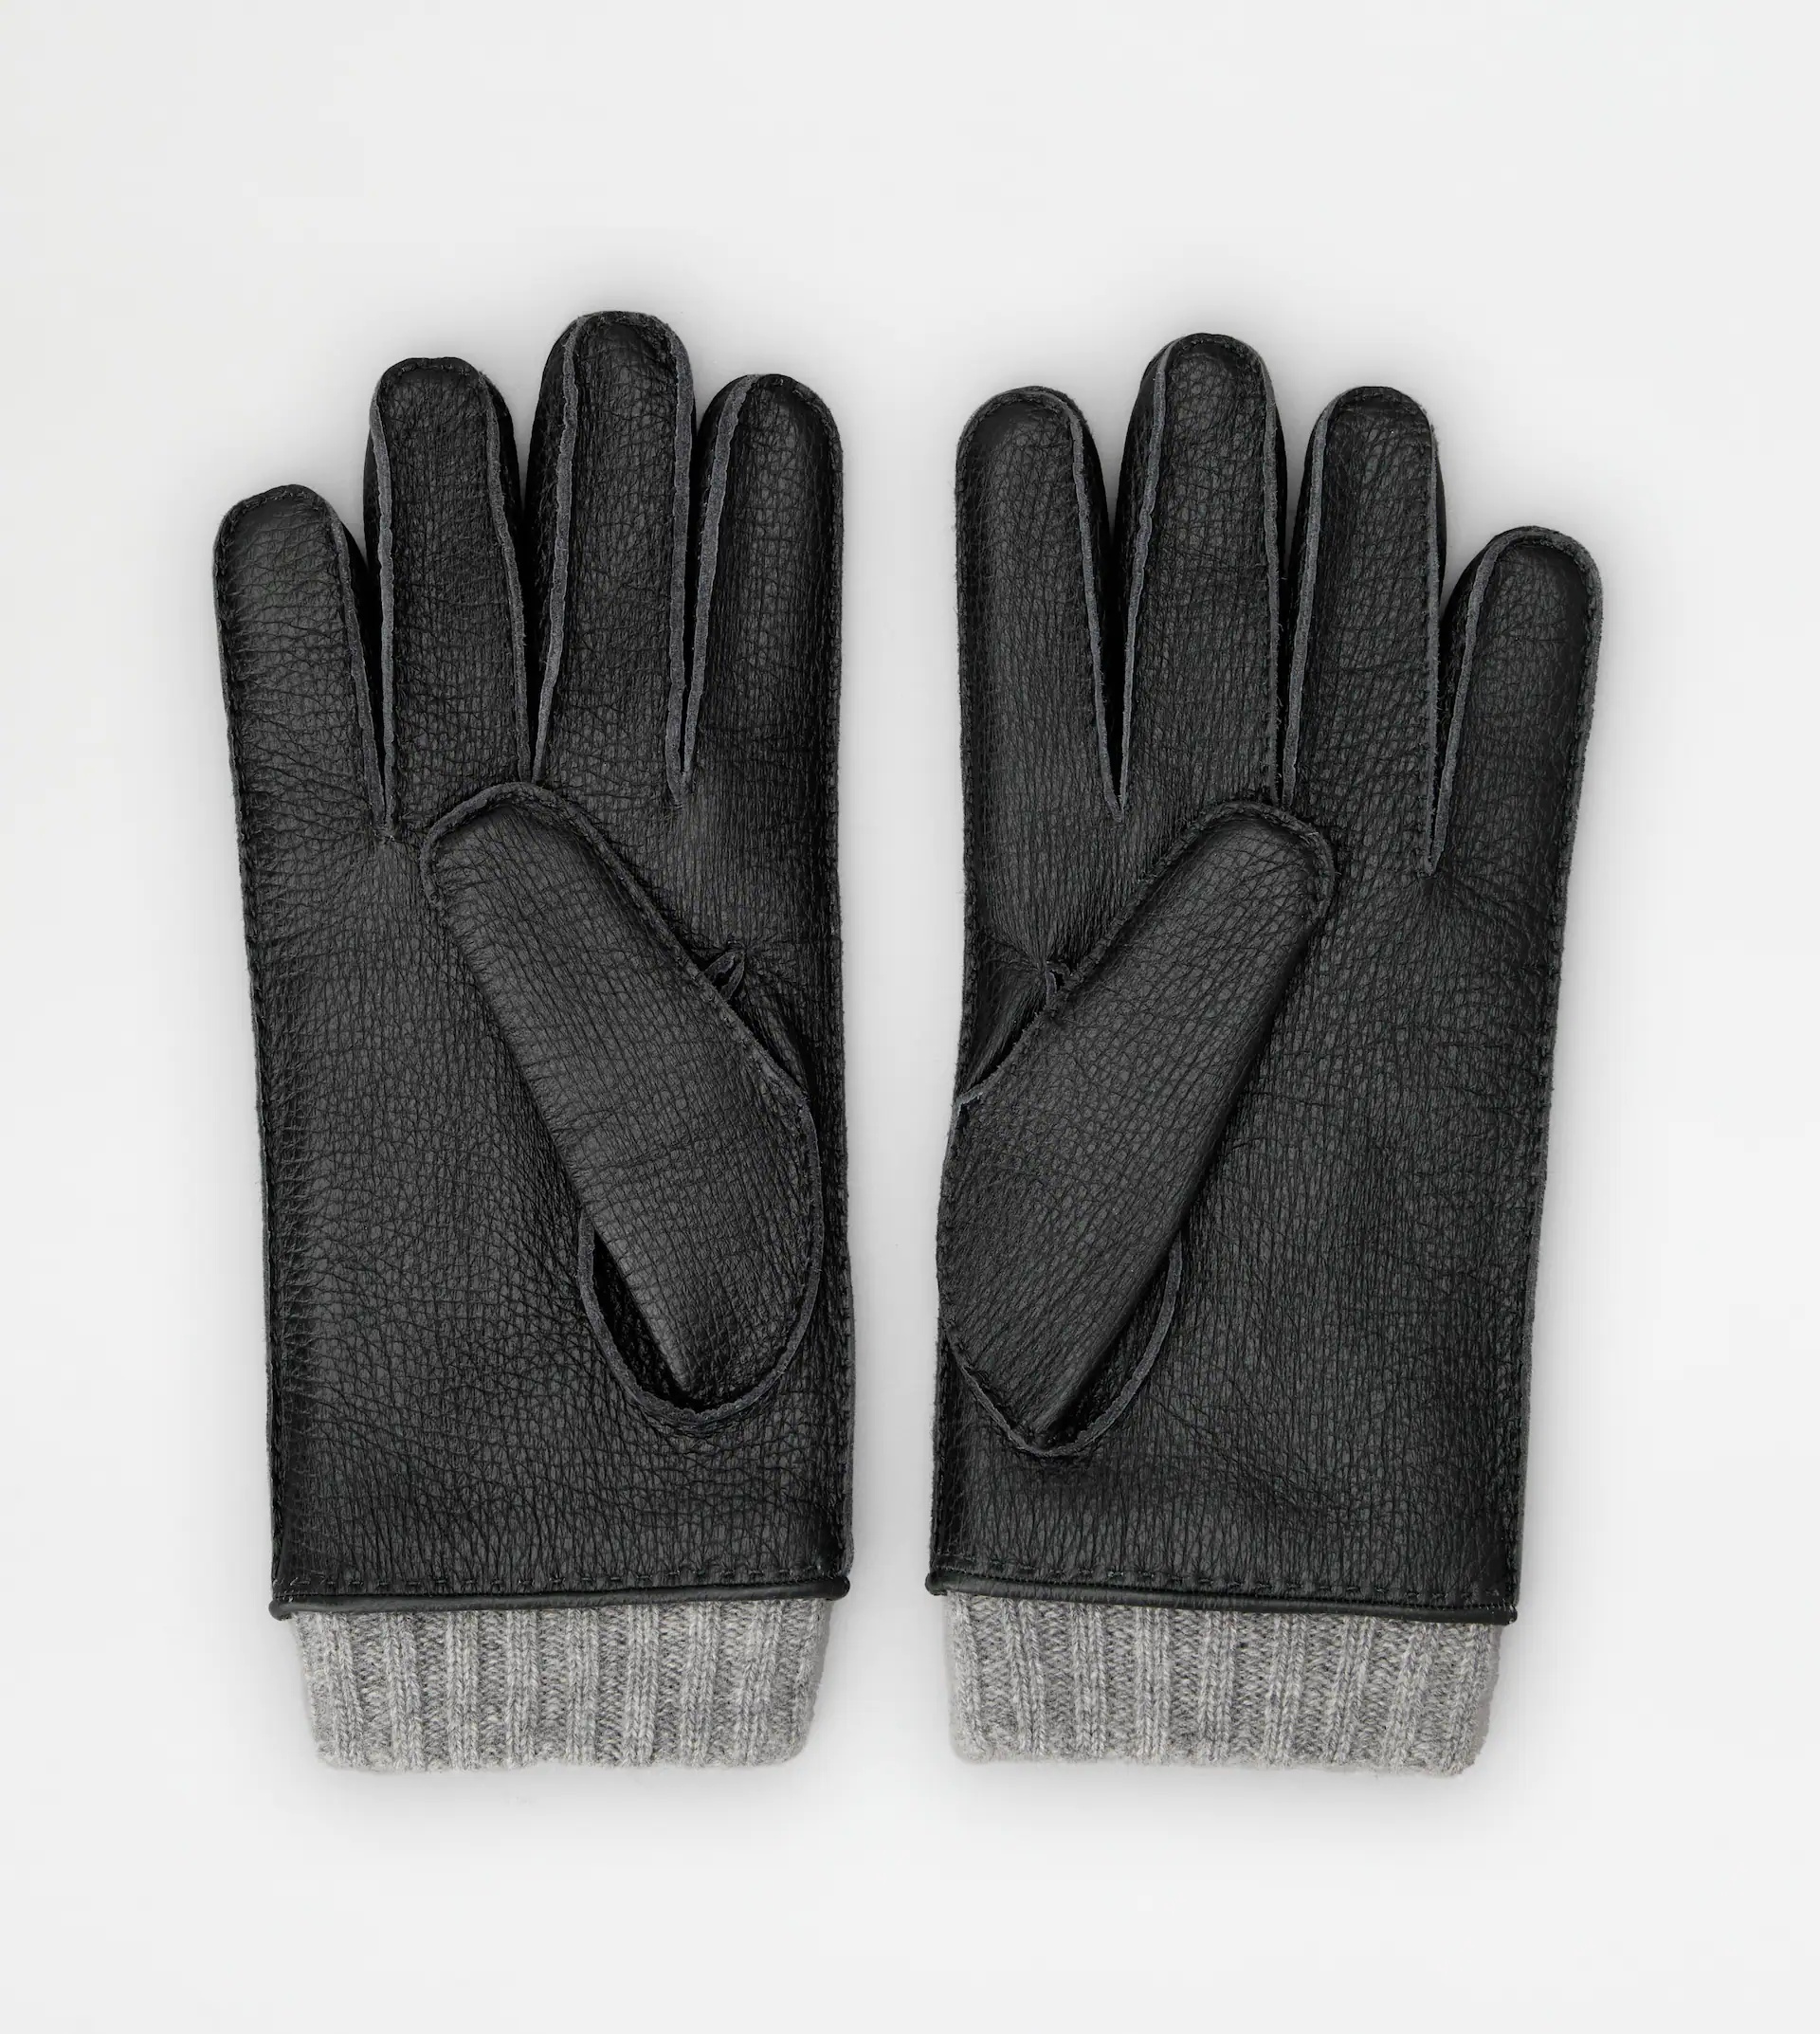 TOD'S GLOVES IN LEATHER AND CASHMERE - BLACK, GREY, ORANGE - 2